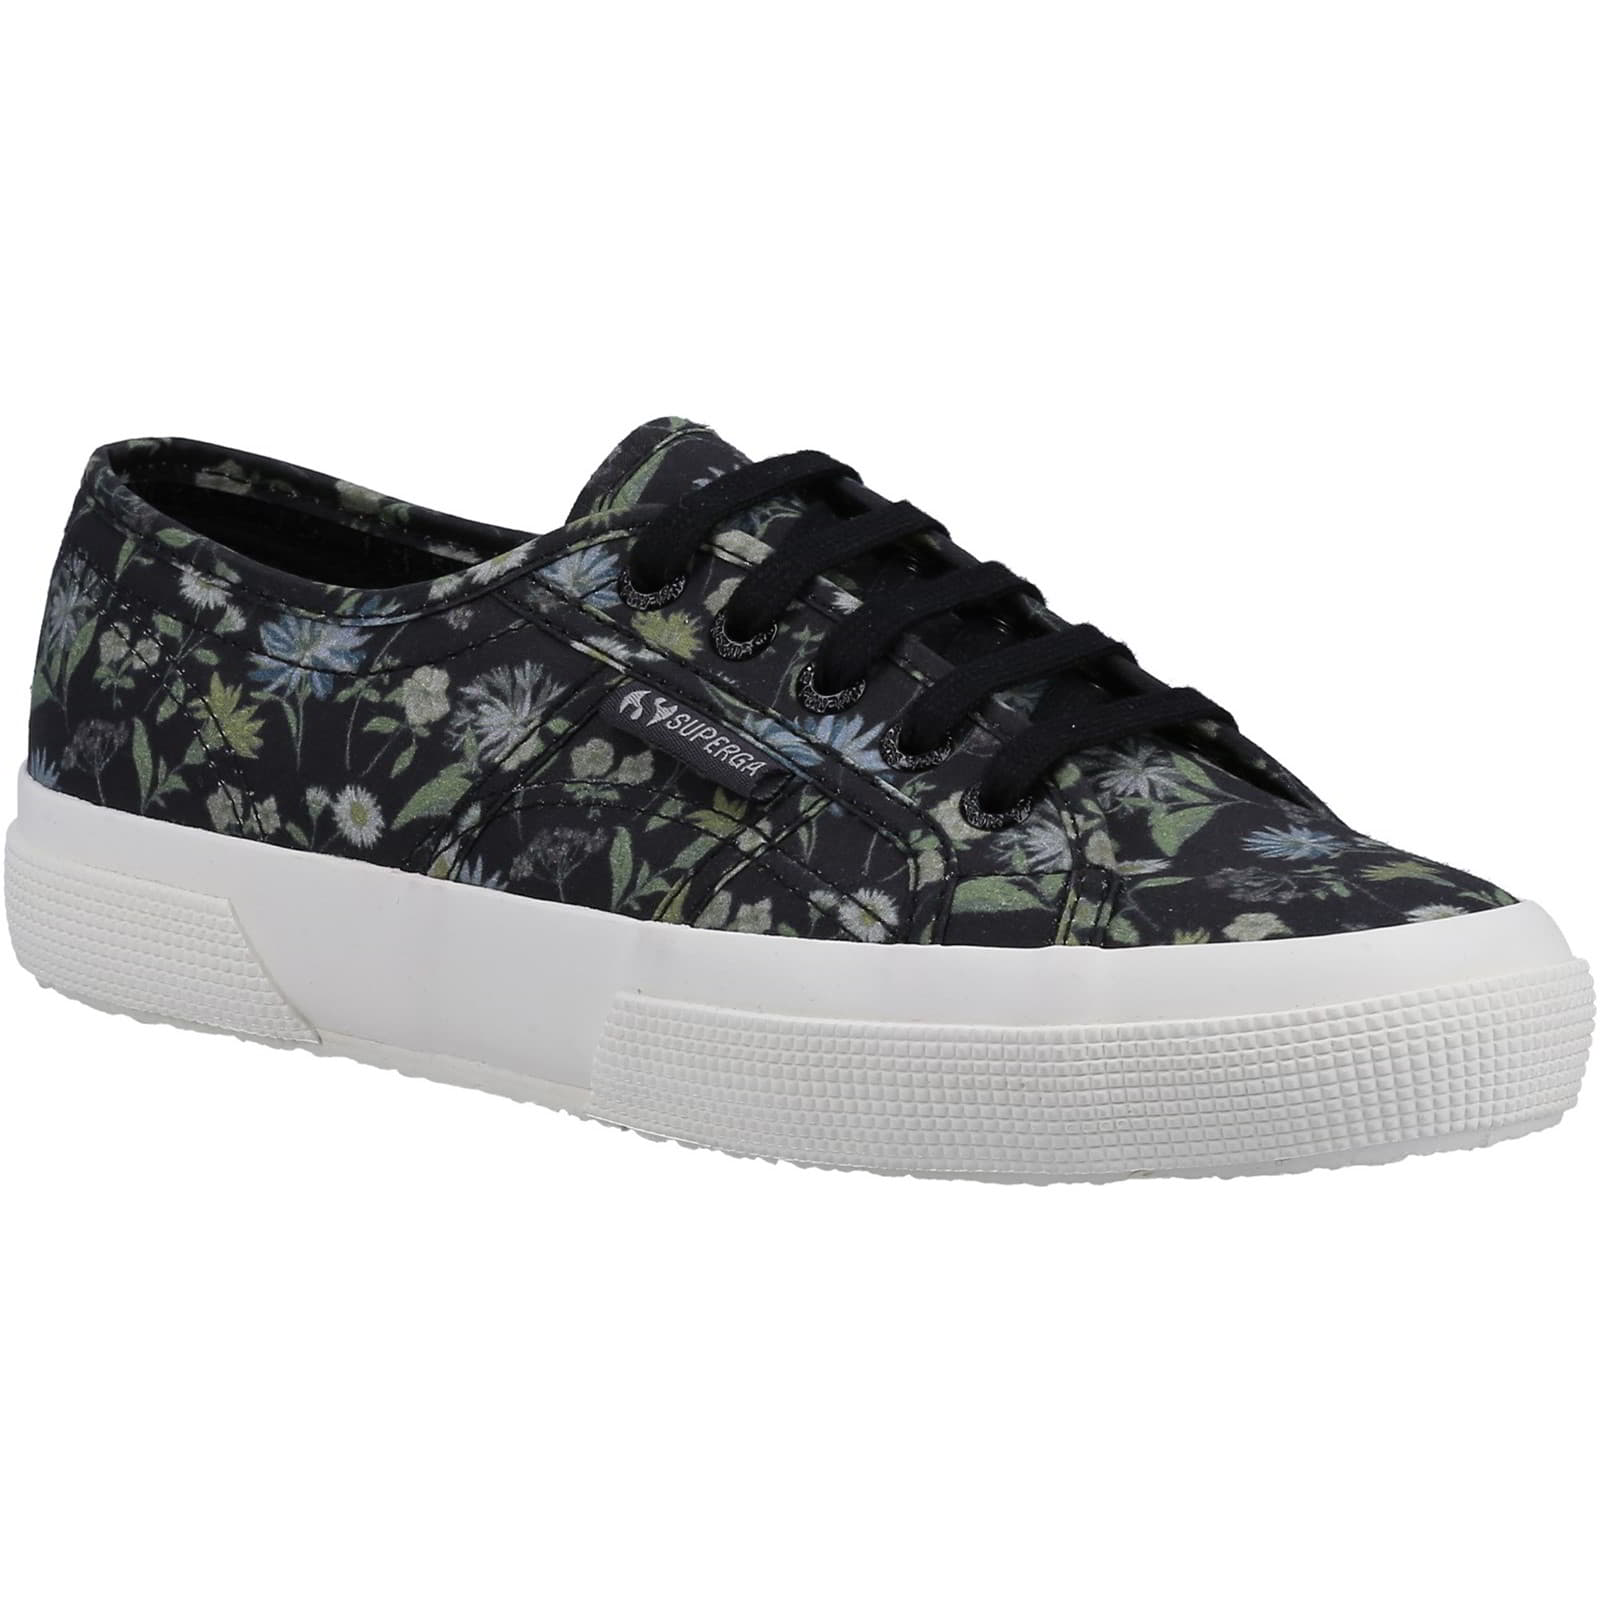 Superga Women's 2750 Floral Print Lace Up Trainers Shoes - UK 7